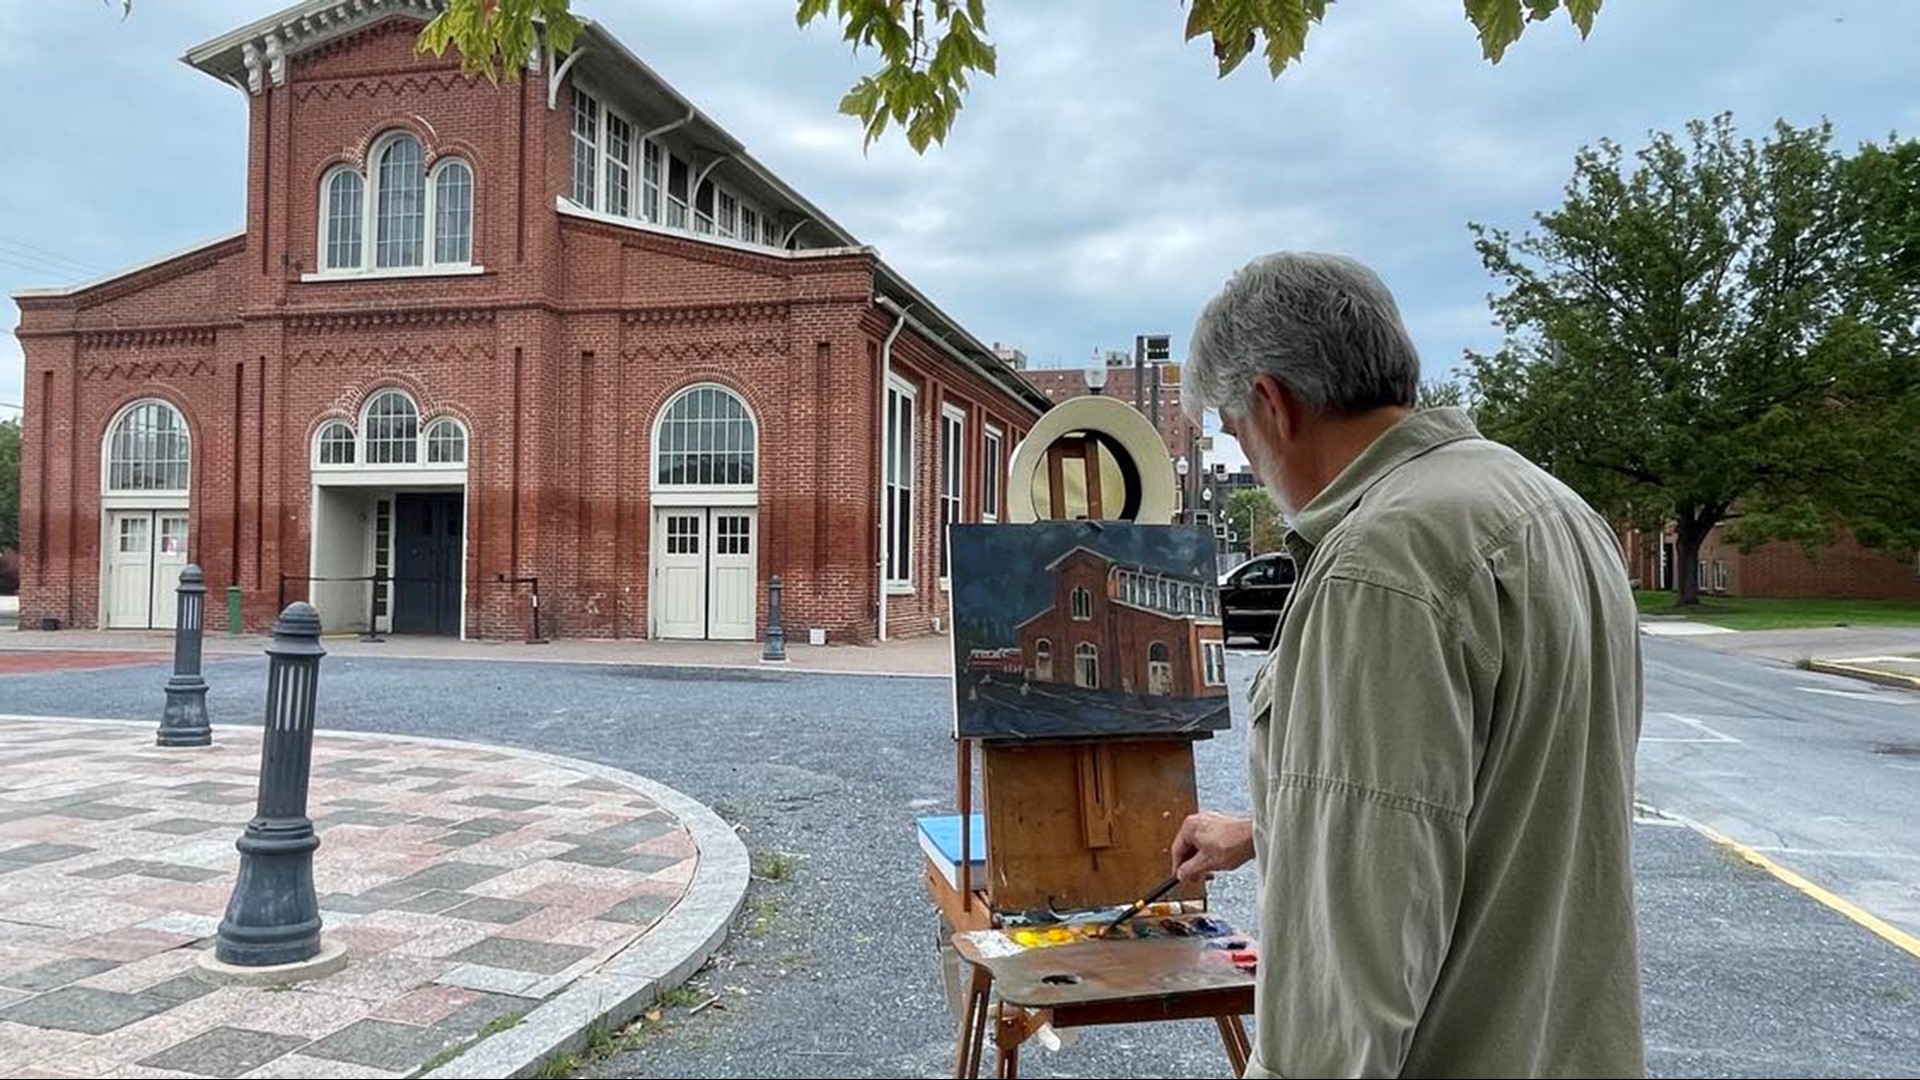 A local art auction is set to benefit the vendors displaced by a fire on July 10 that gutted the brick building of the Broad Street Market.